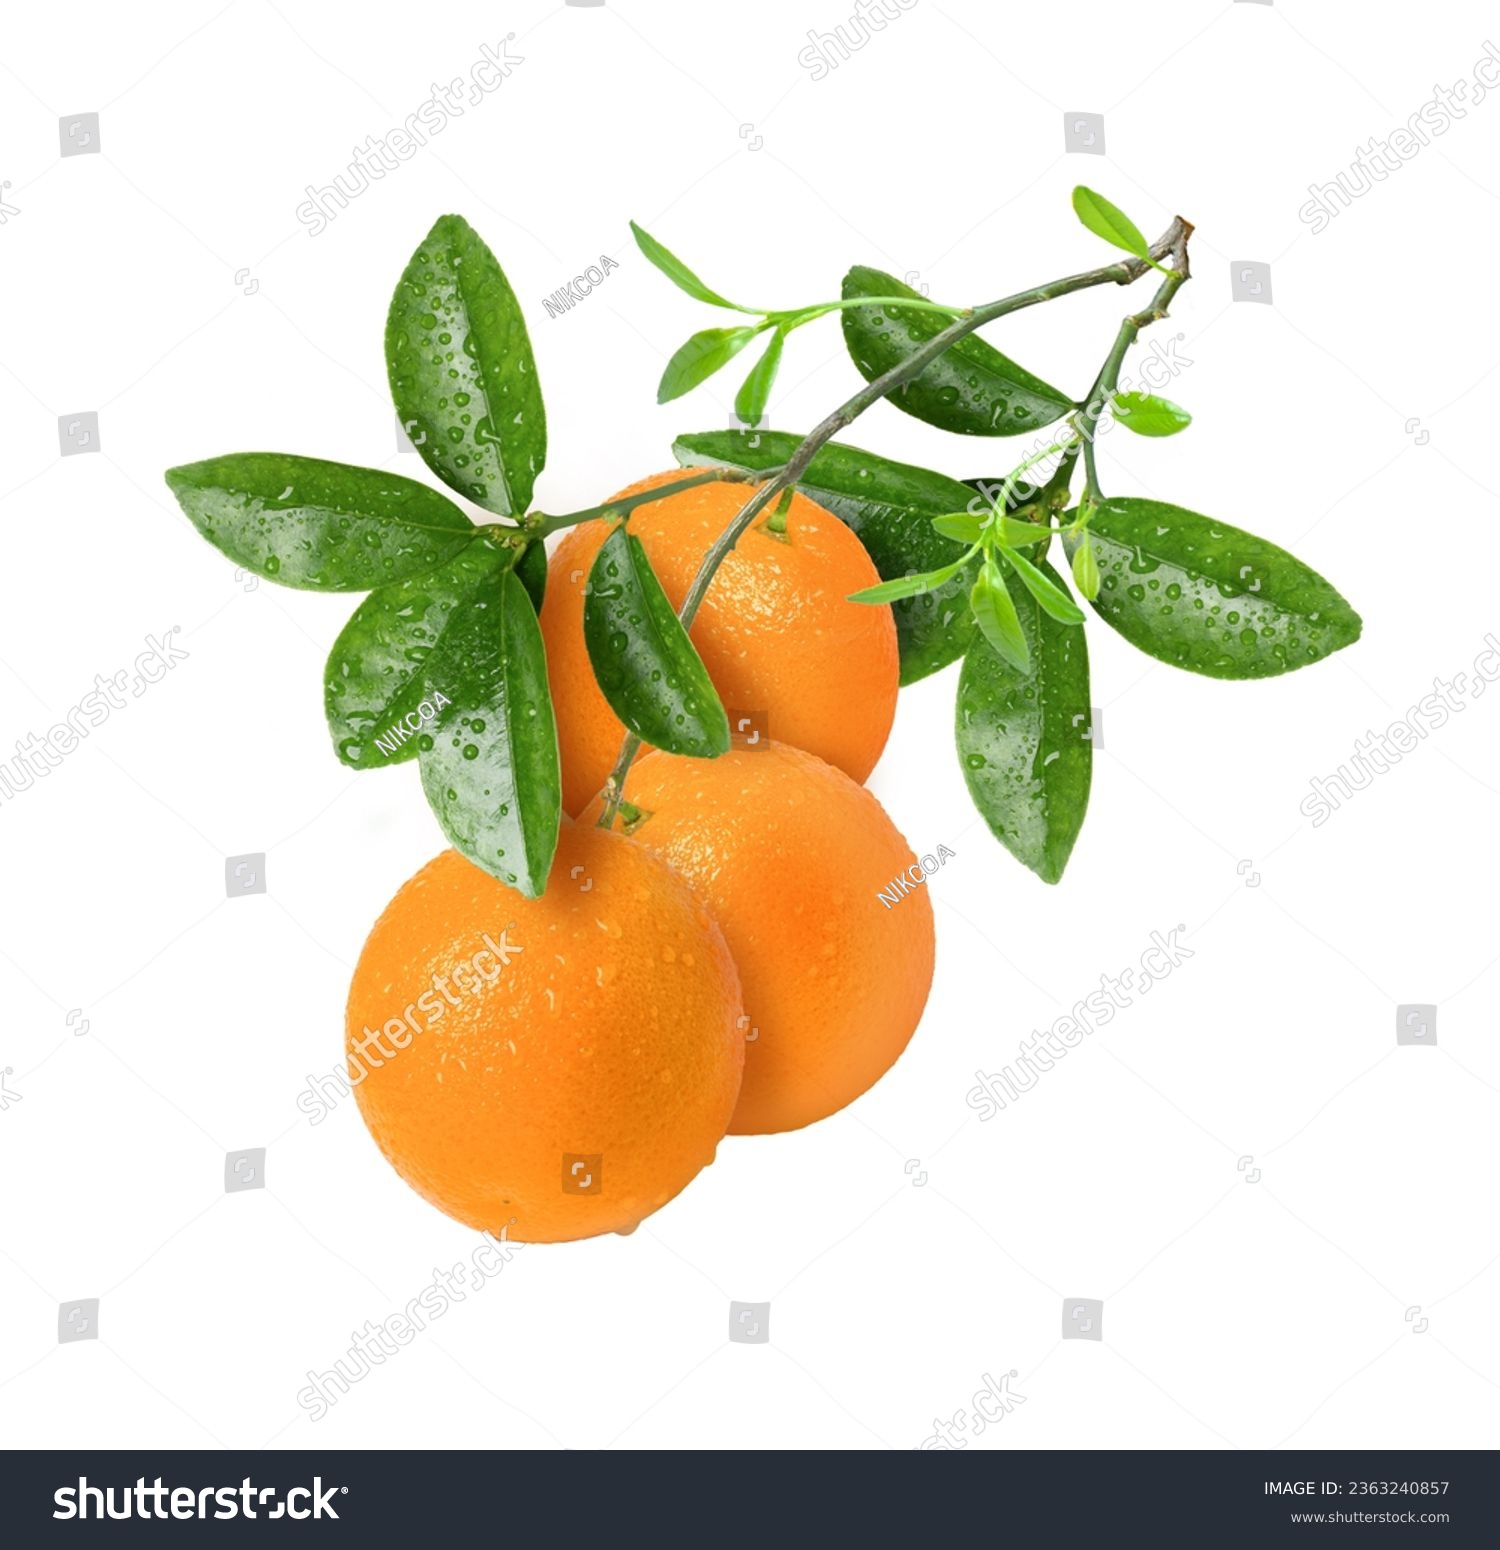 Fresh orange fruit hang on tree branch with green leaves isolated on white background. #2363240857